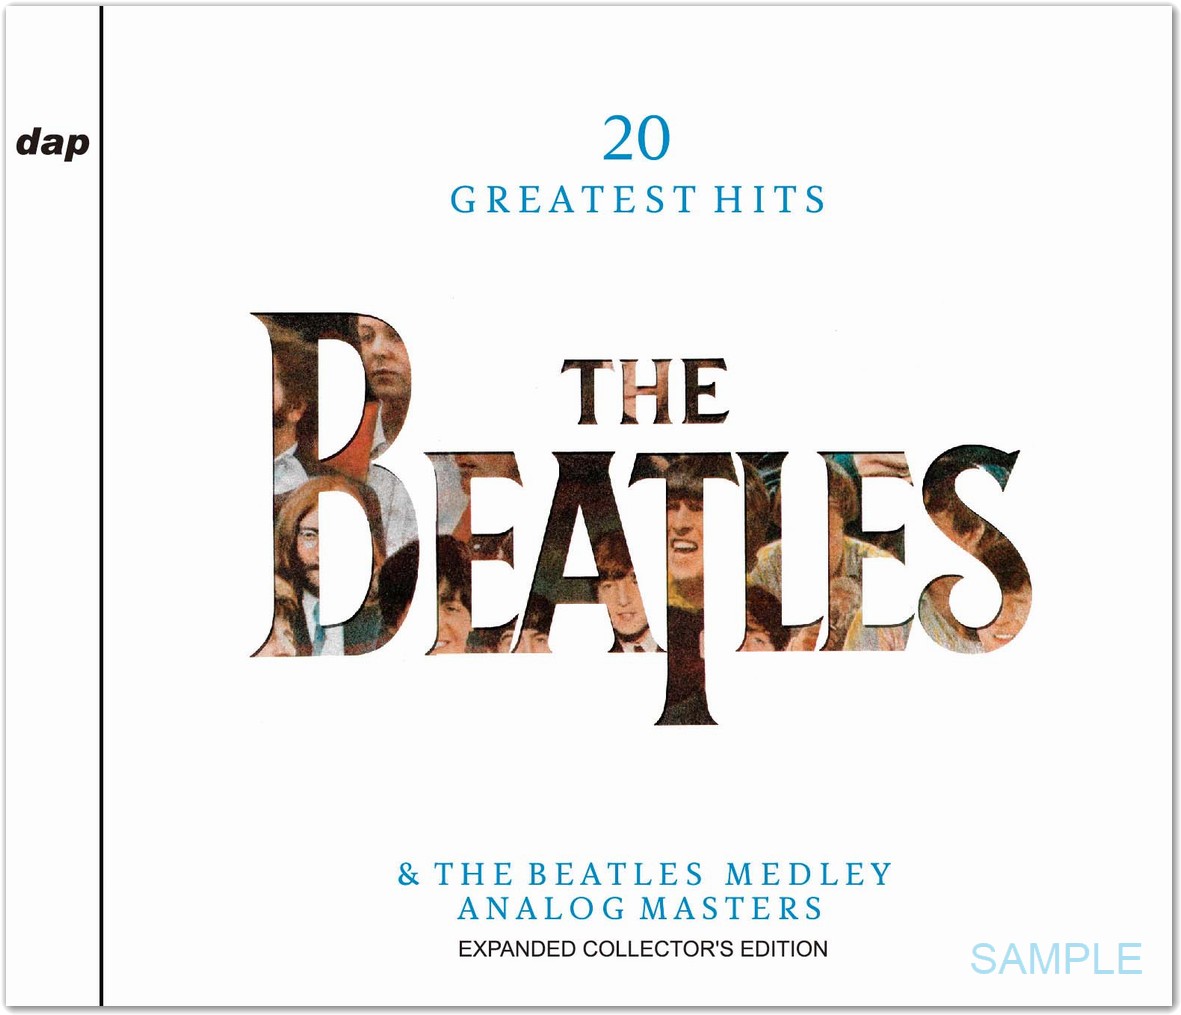 EDITION(2CD)　COLLECTOR'S　BEATLES　BEATLES　EXPANDED　ANALOG　MASTERS　MEDLEY:　THE　THE　HITS　20　GREATEST　navy-blue